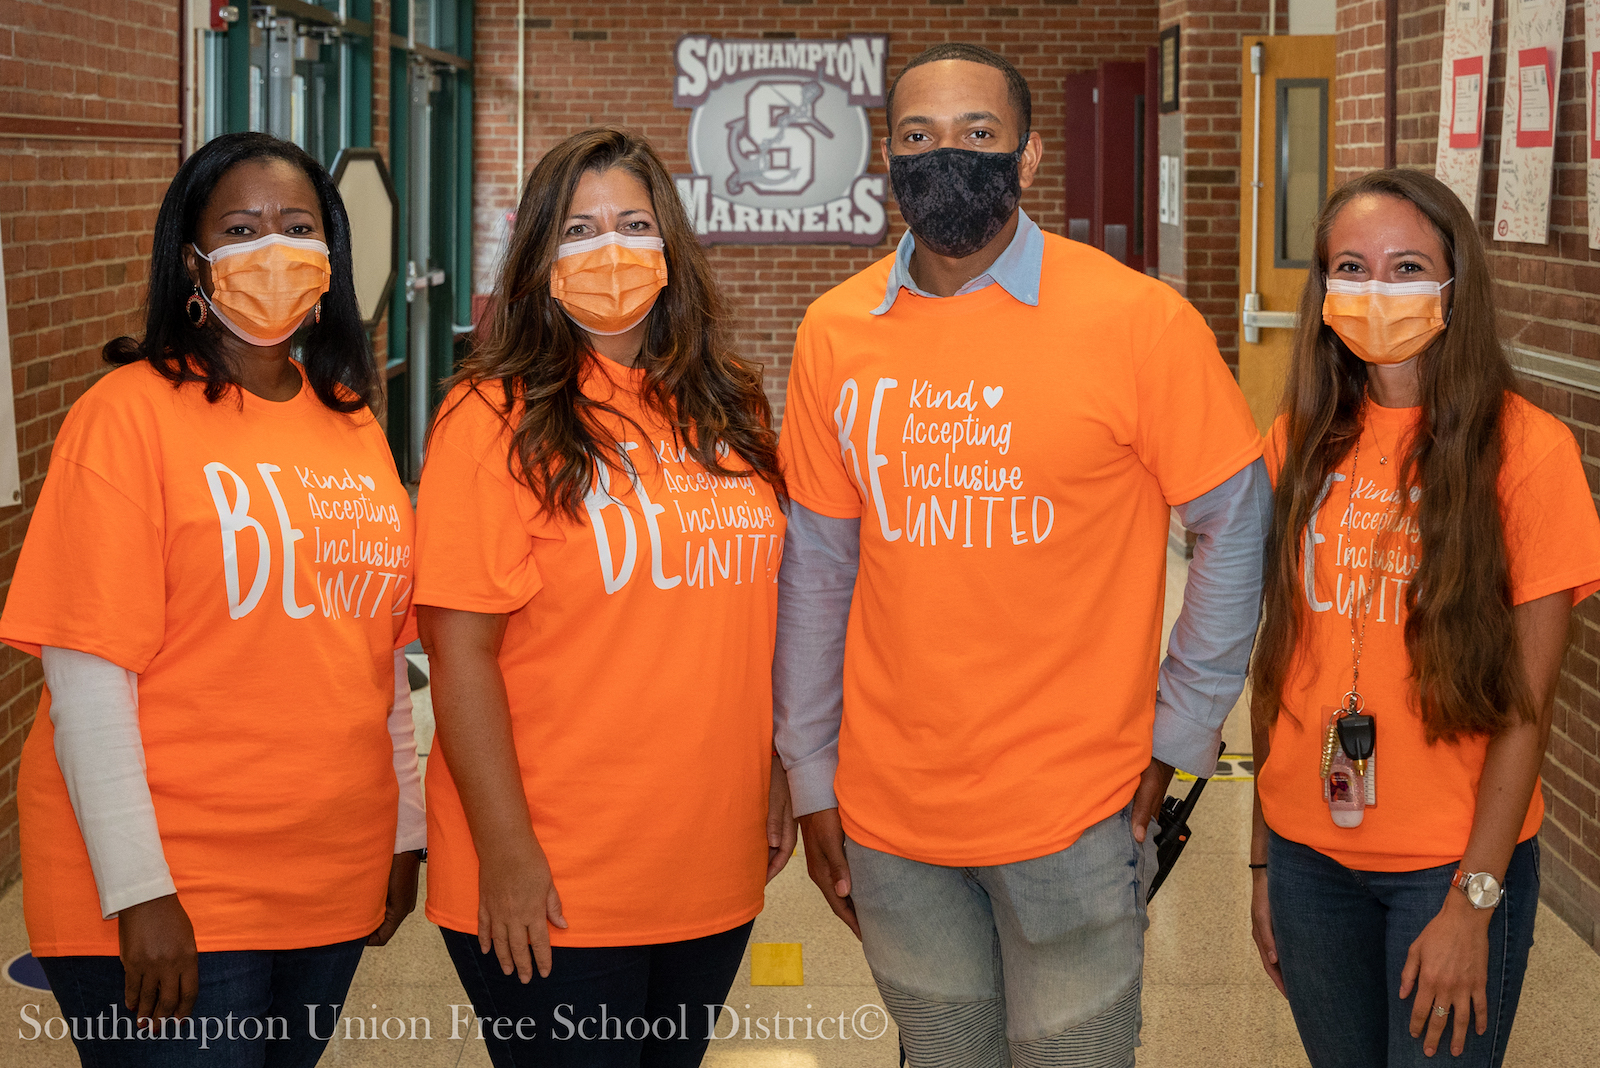 Southampton Intermediate School marked Unity Day on October 21, as well as the day following, with staff and students wearing orange shirts and masks. The two-day event, spearheaded by the guidance department, also encouraged everyone to write something positive about themselves on a paper strip that would be included in a “chain of unity” displayed in the school’s lobby. 